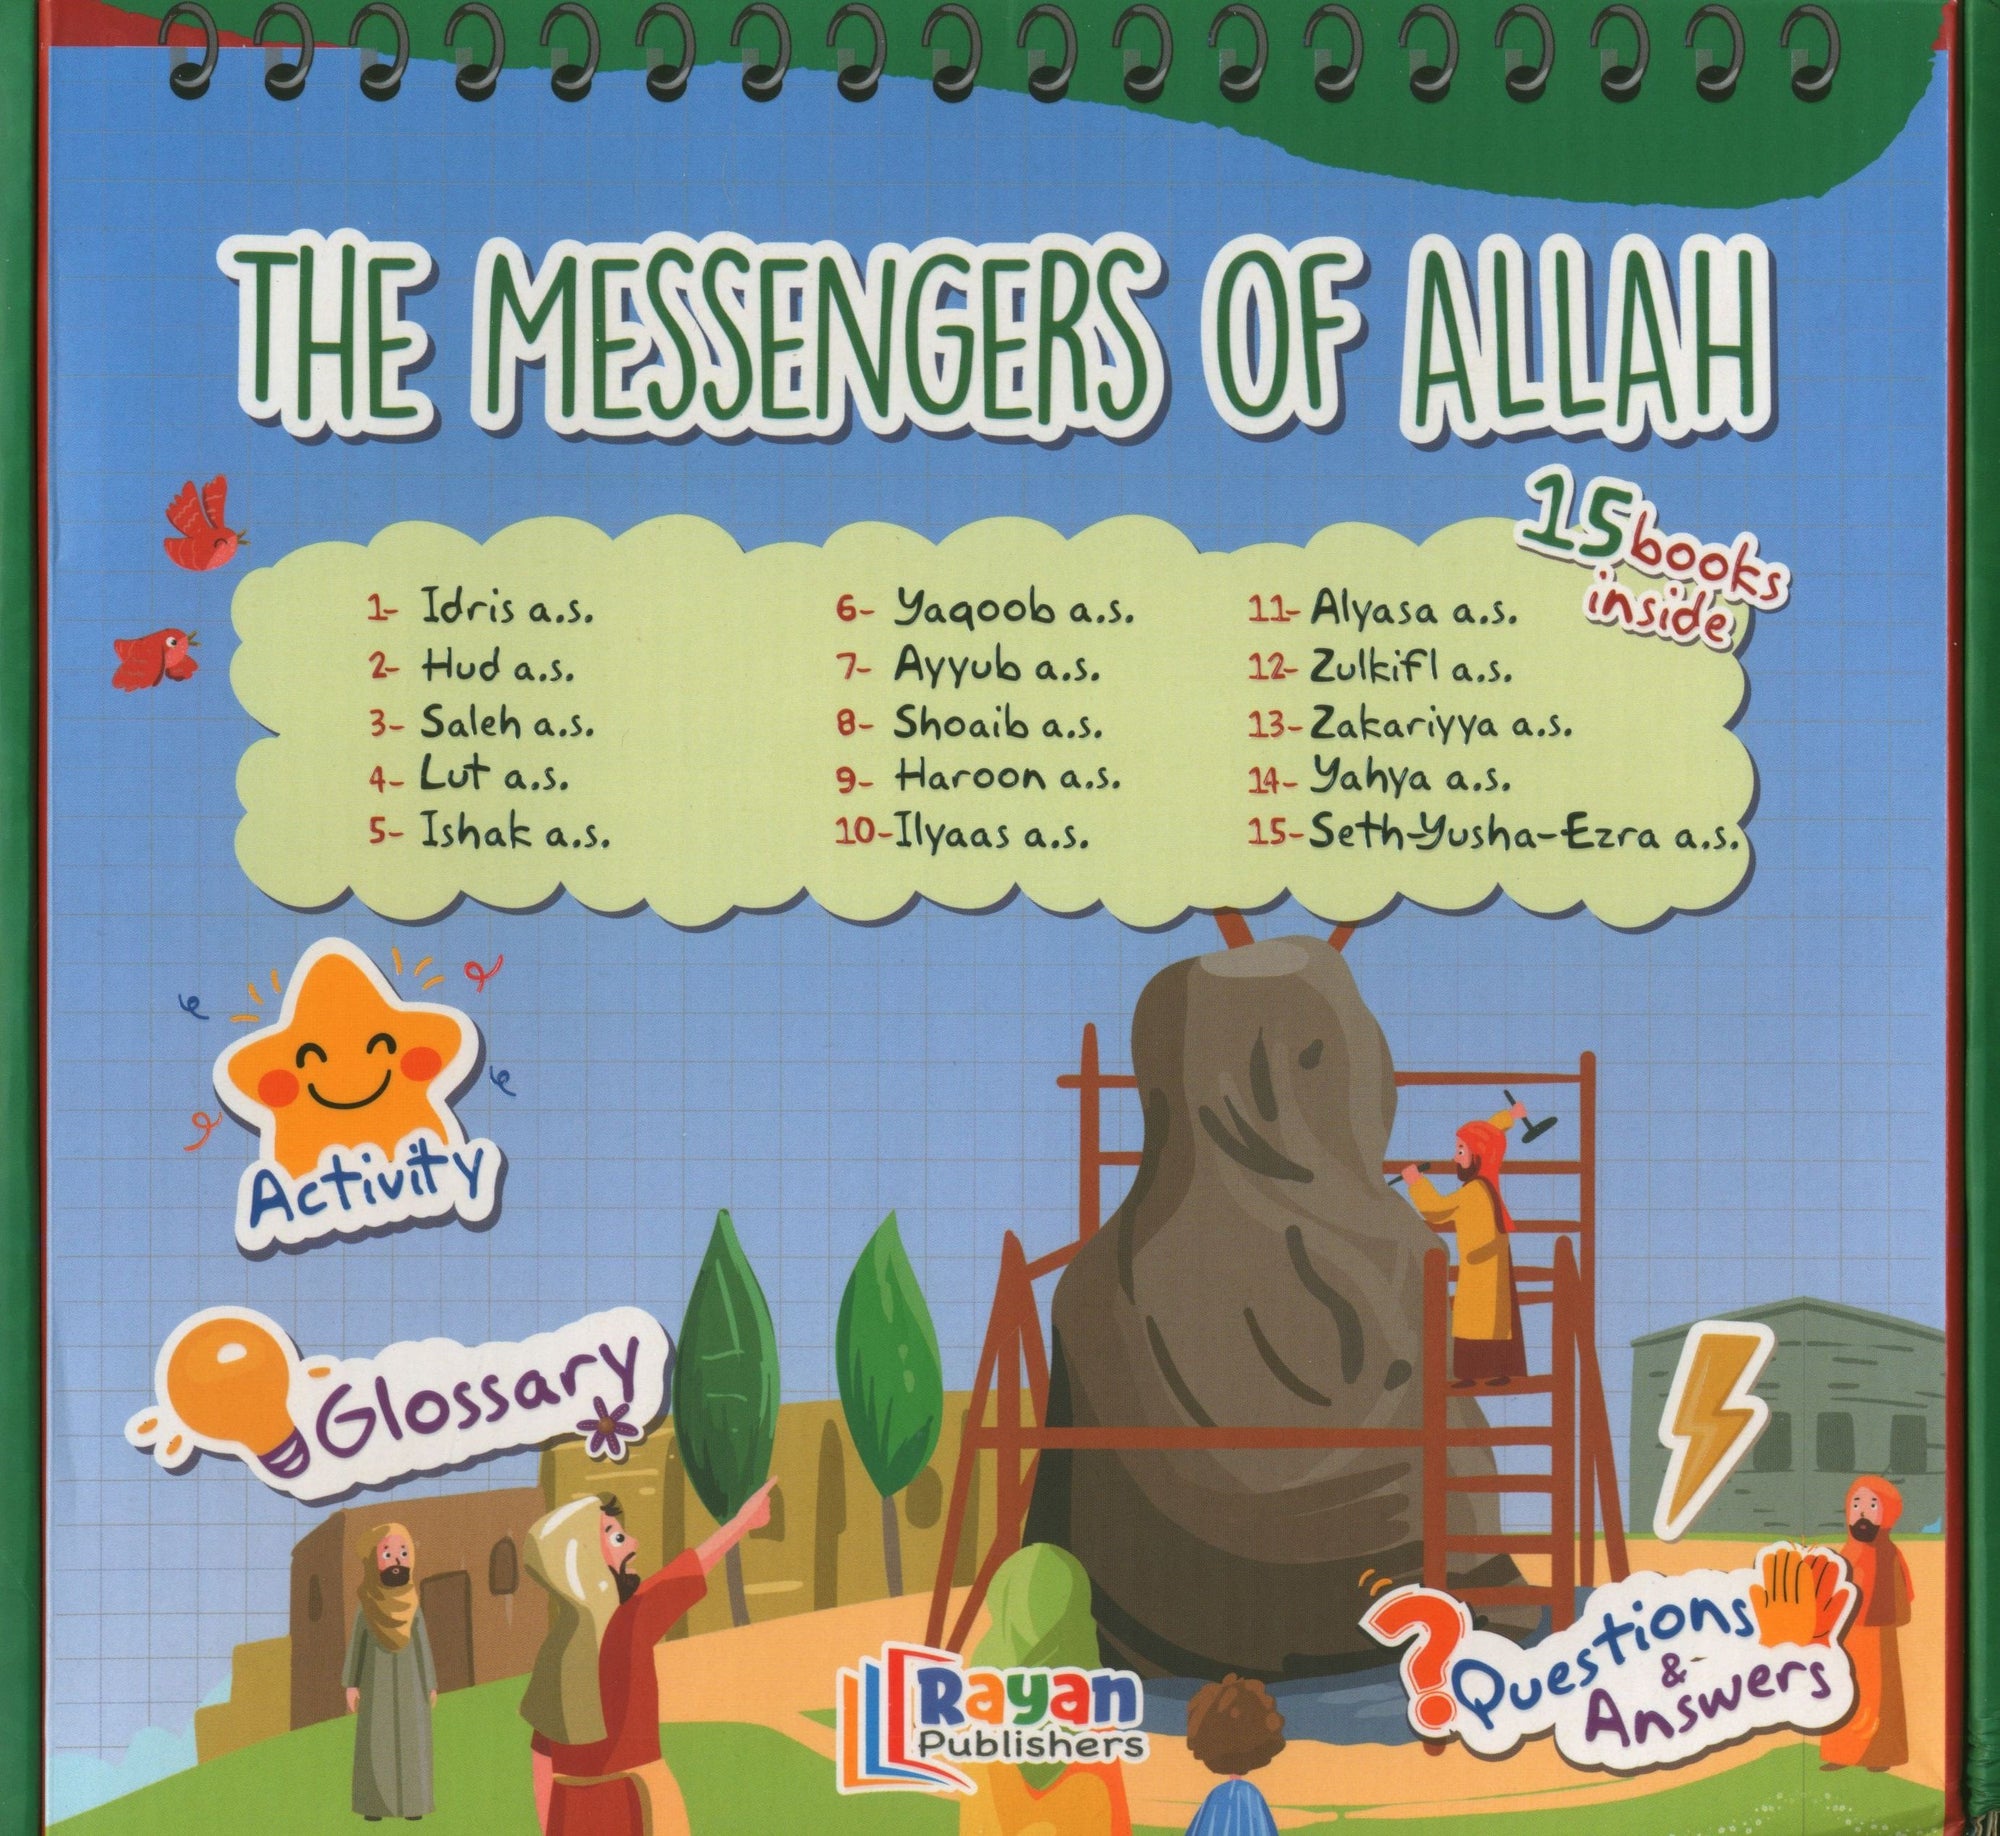 The Messengers of Allah - 15 Books